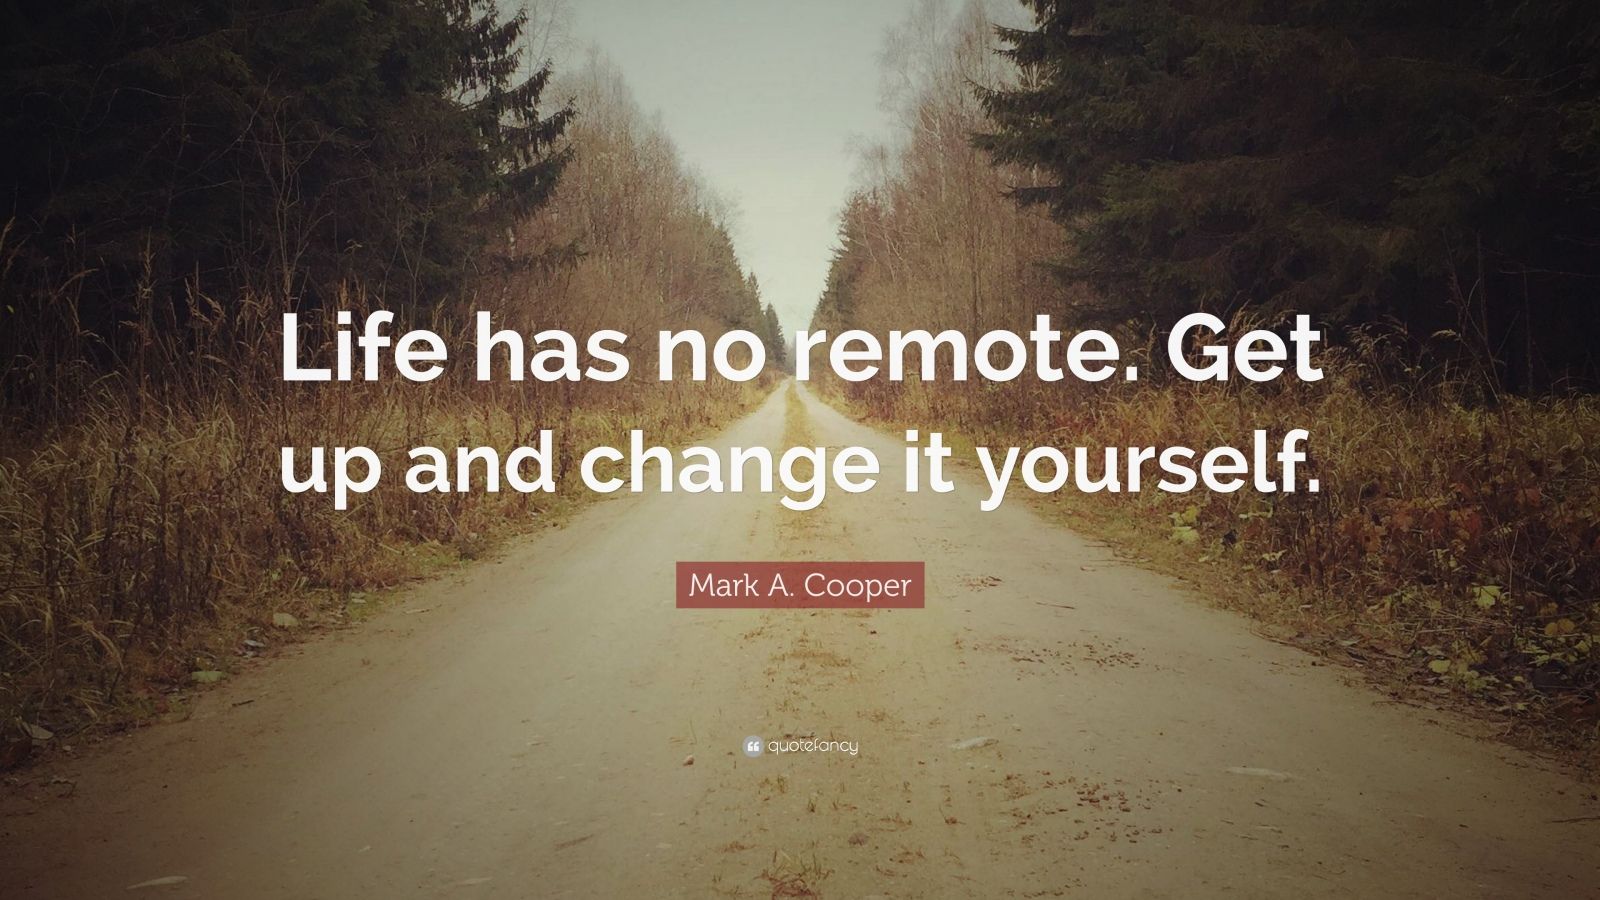 Mark A. Cooper Quote: “Life has no remote. Get up and change it yourself.”